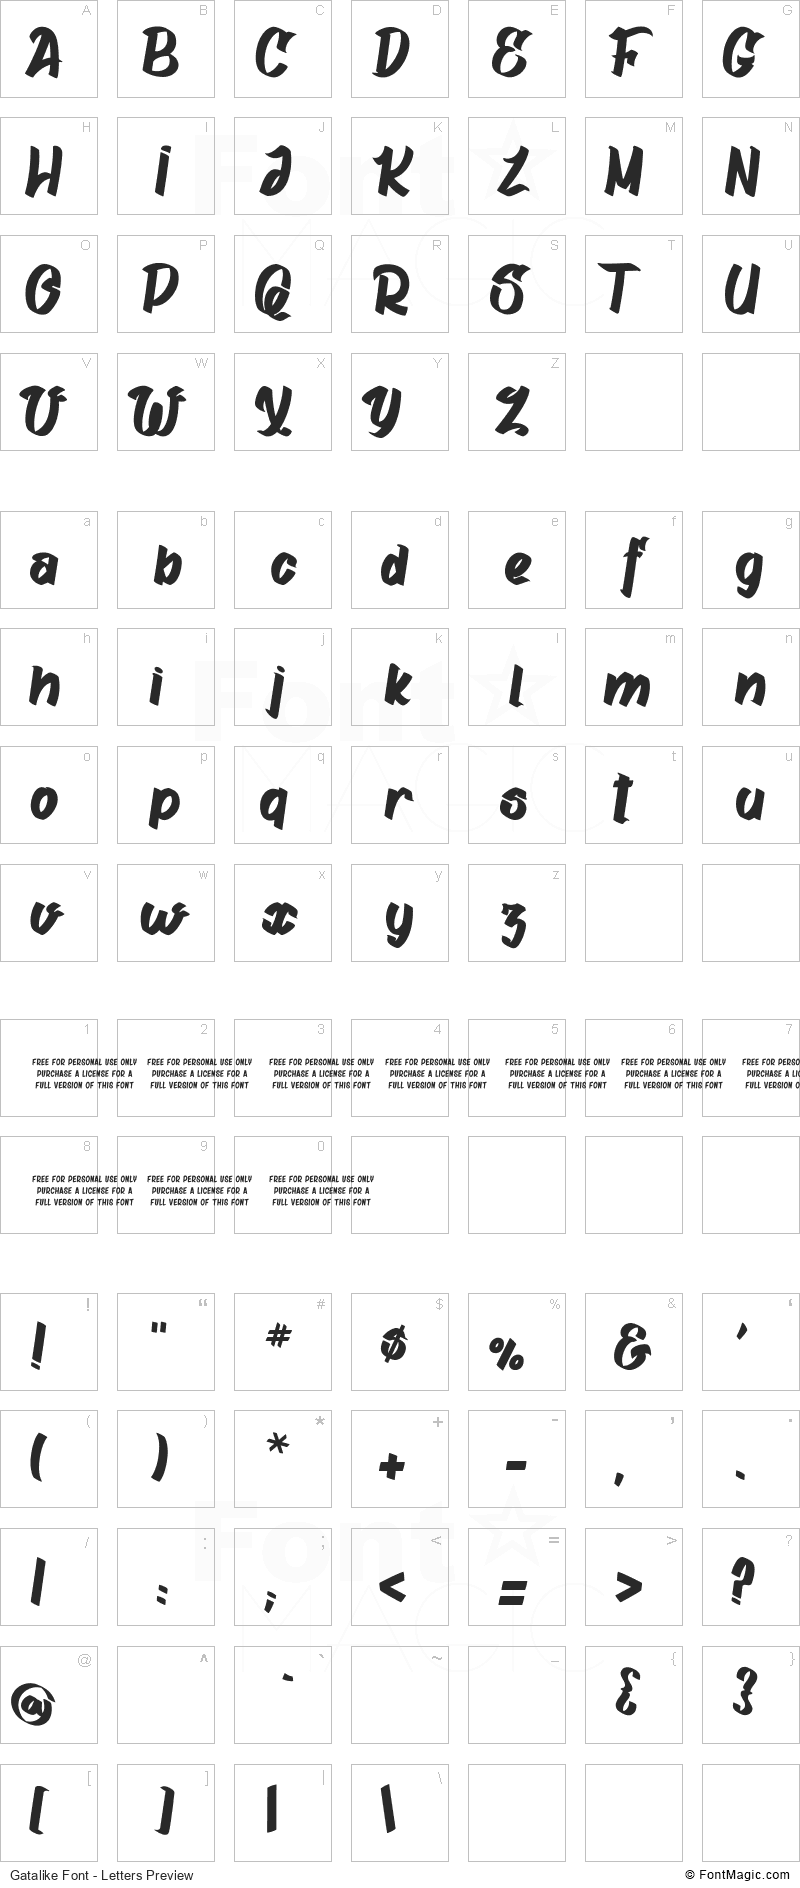 Gatalike Font - All Latters Preview Chart